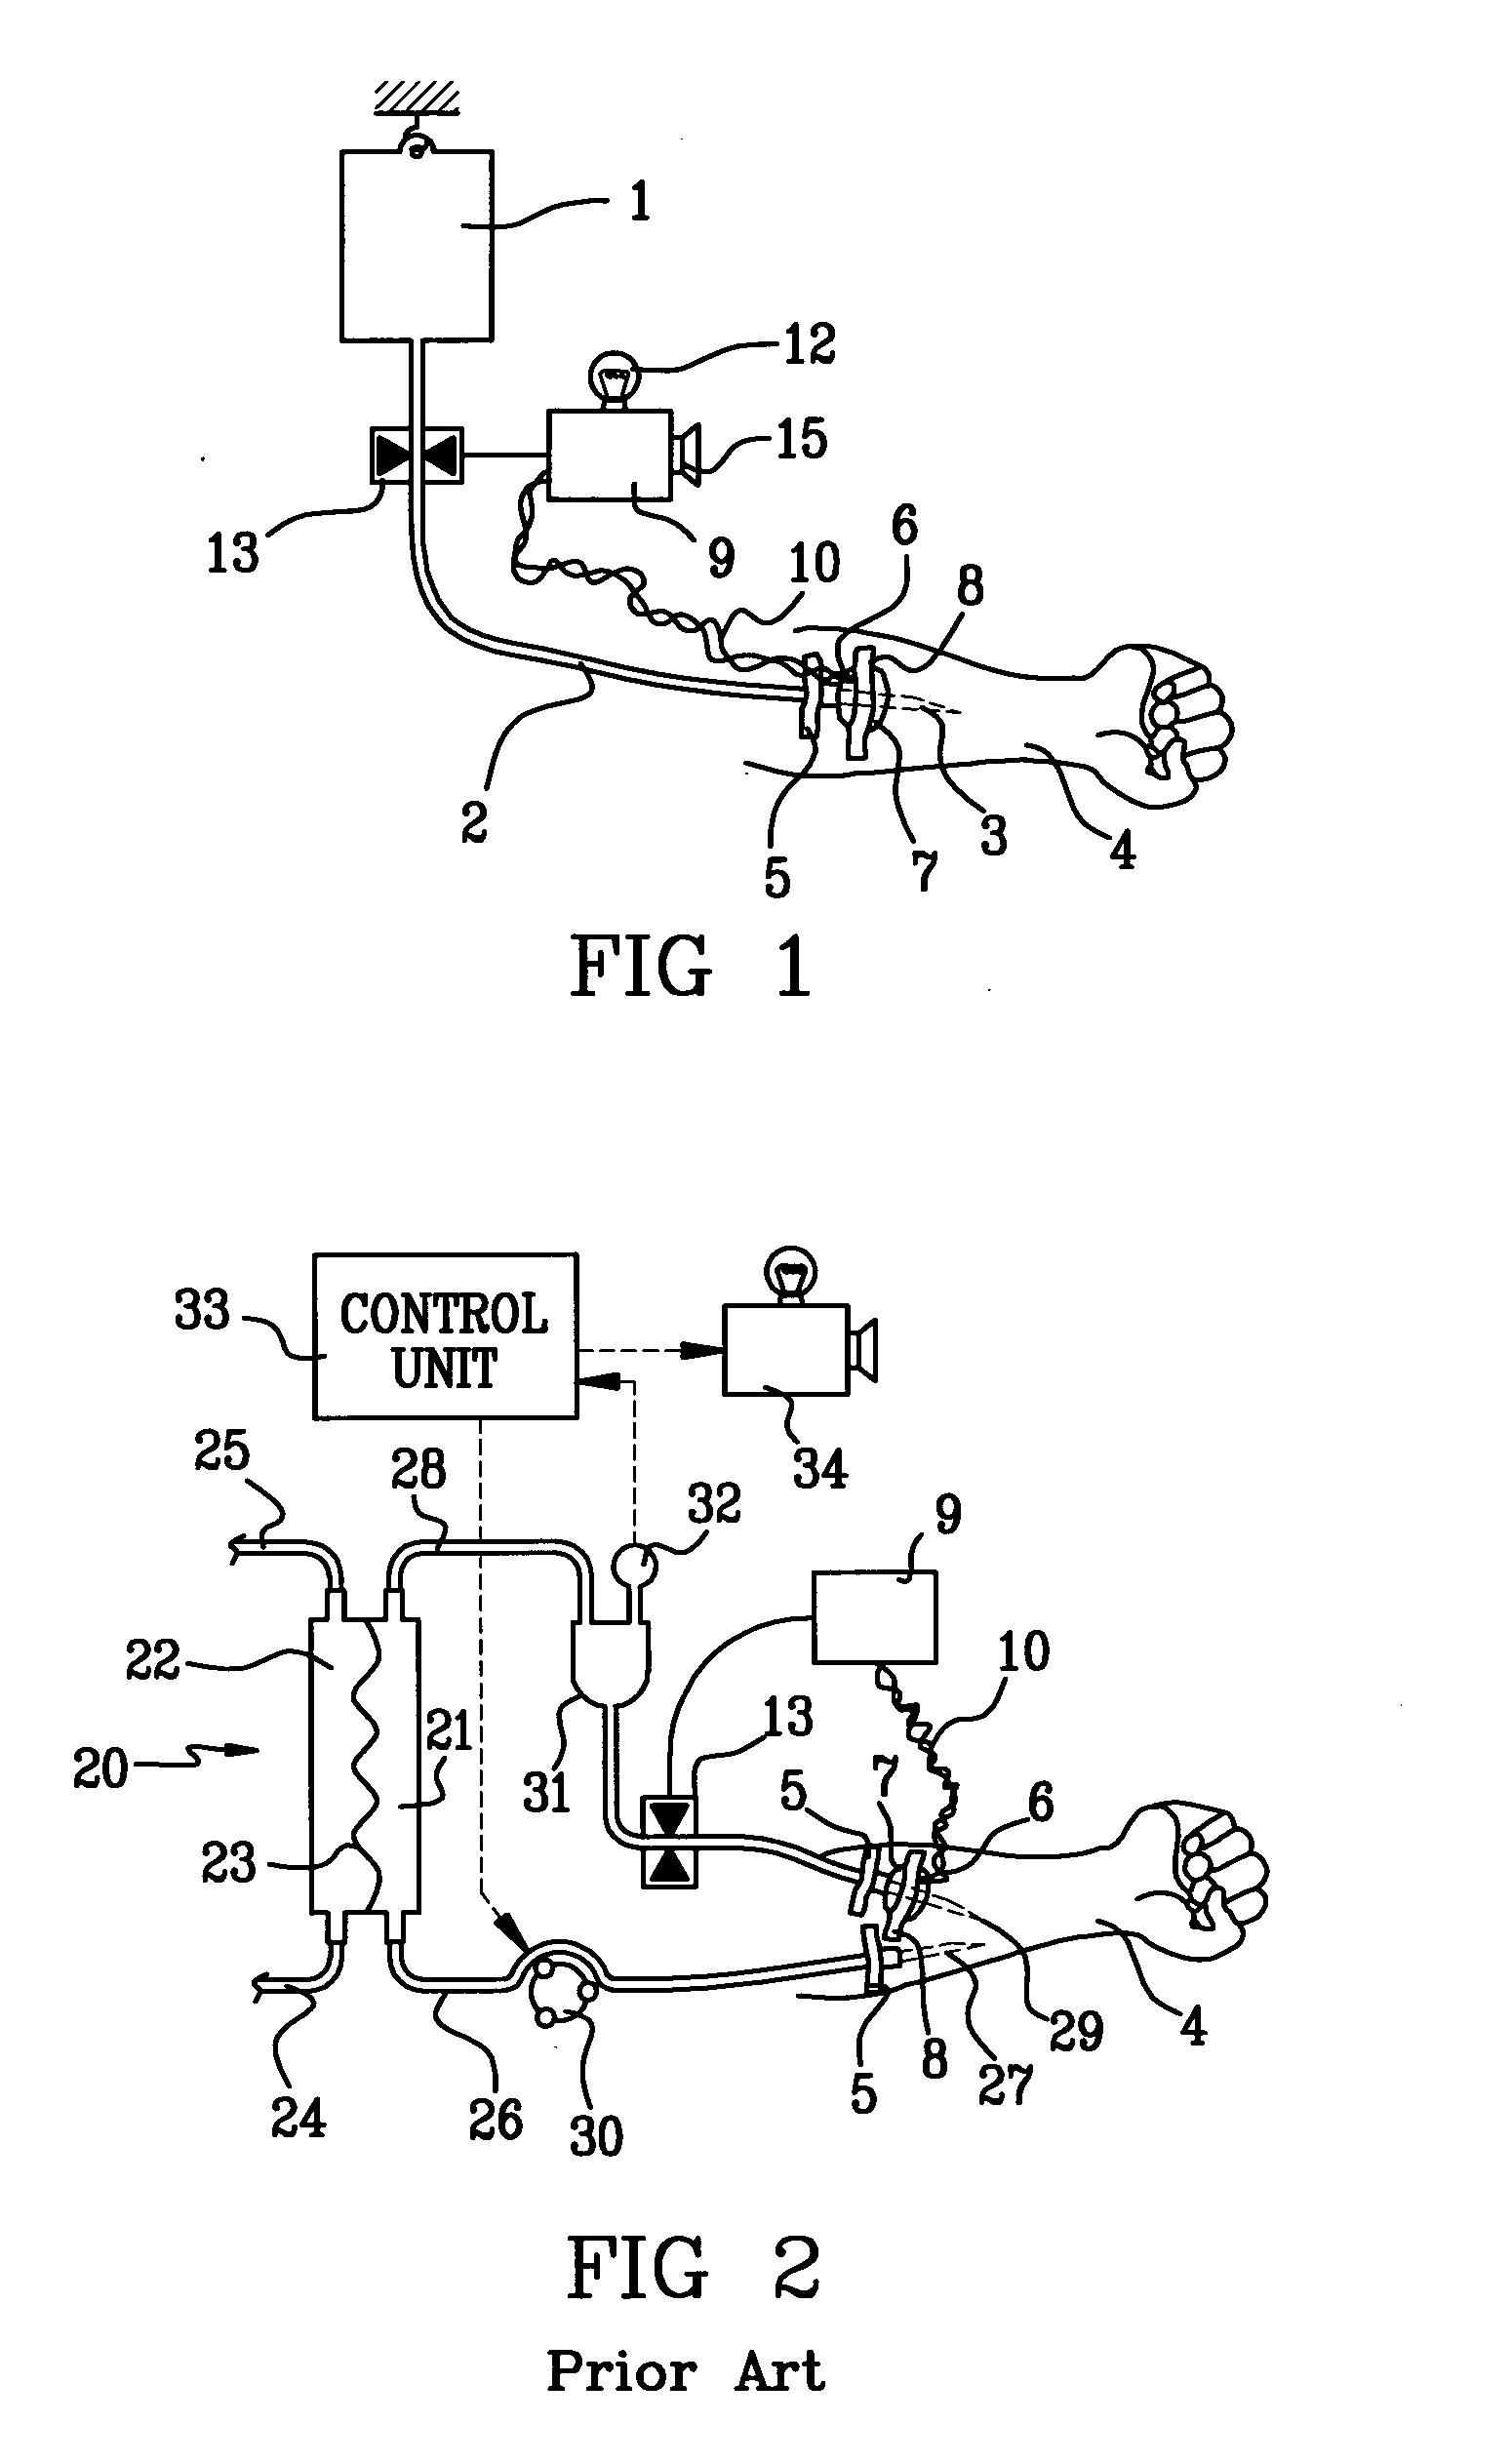 Probe for fluid leak detection with specific distal part